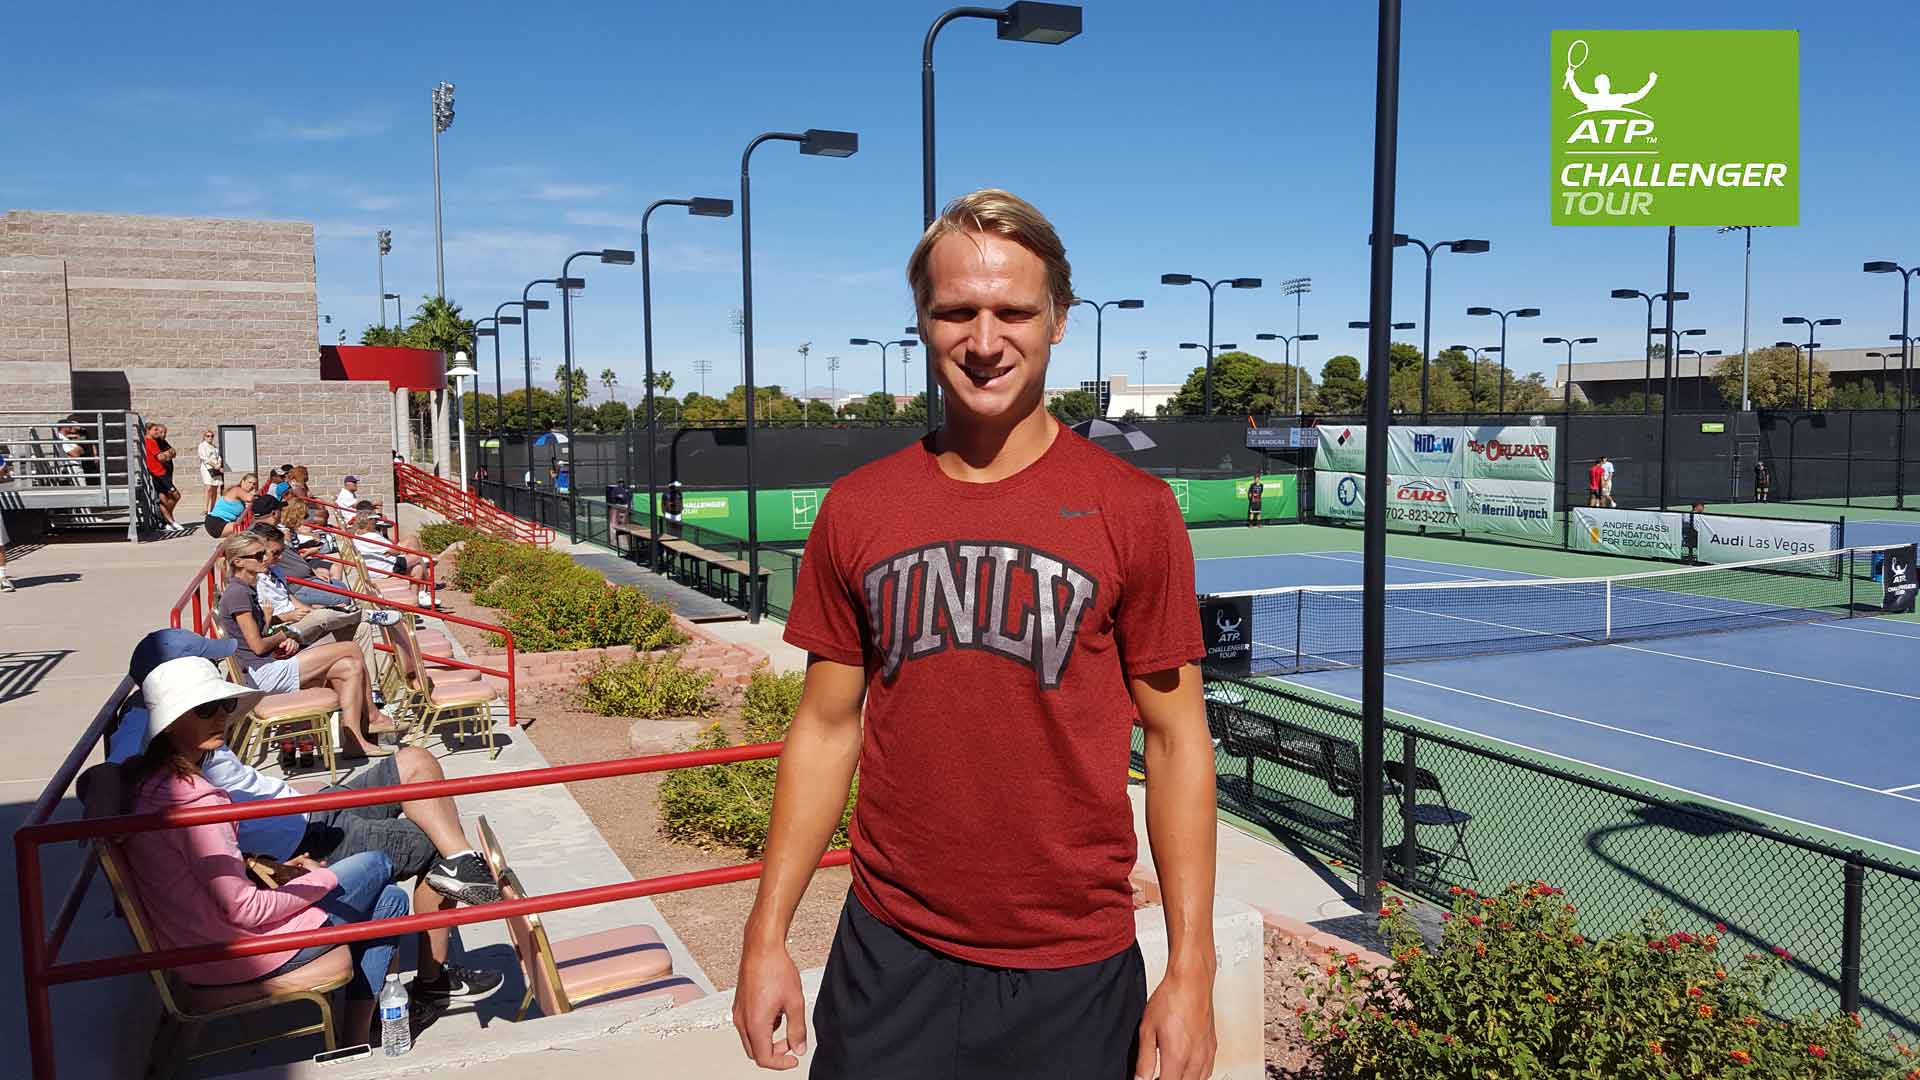 Jakob Amilon had the crowd on his side at the ATP Challenger Tour event in Las Vegas.